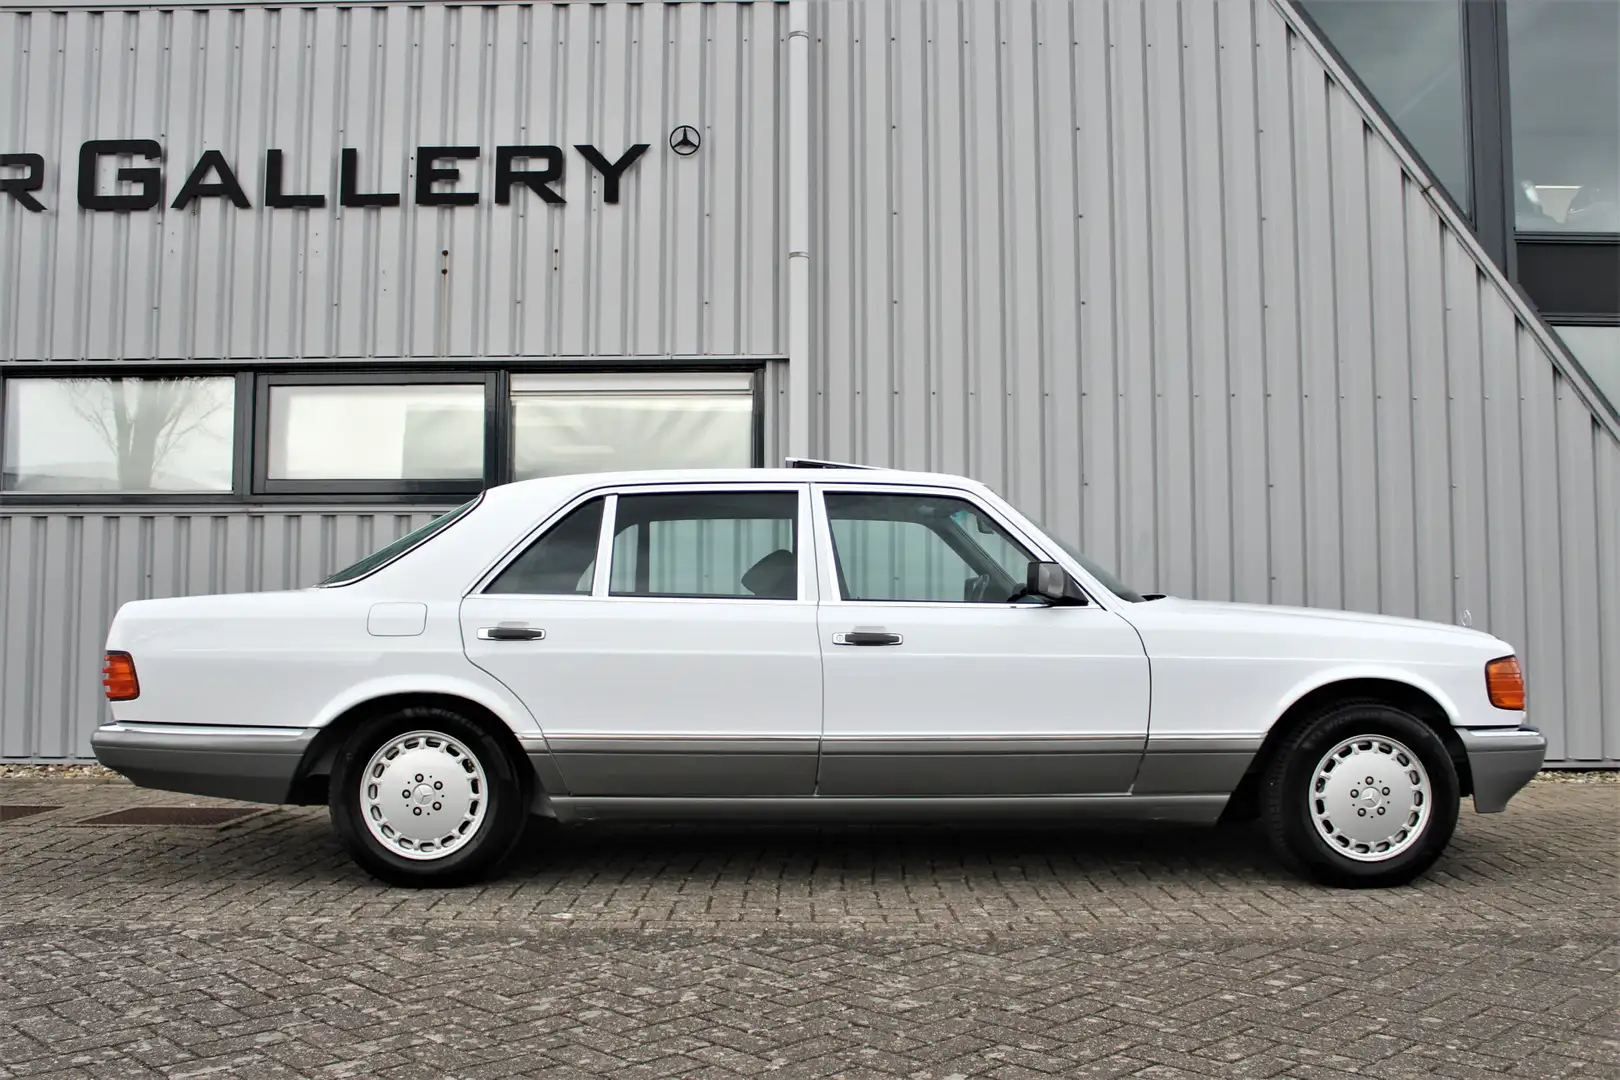 Mercedes-Benz S 560 SEL Youngtimer 121438km White - 2